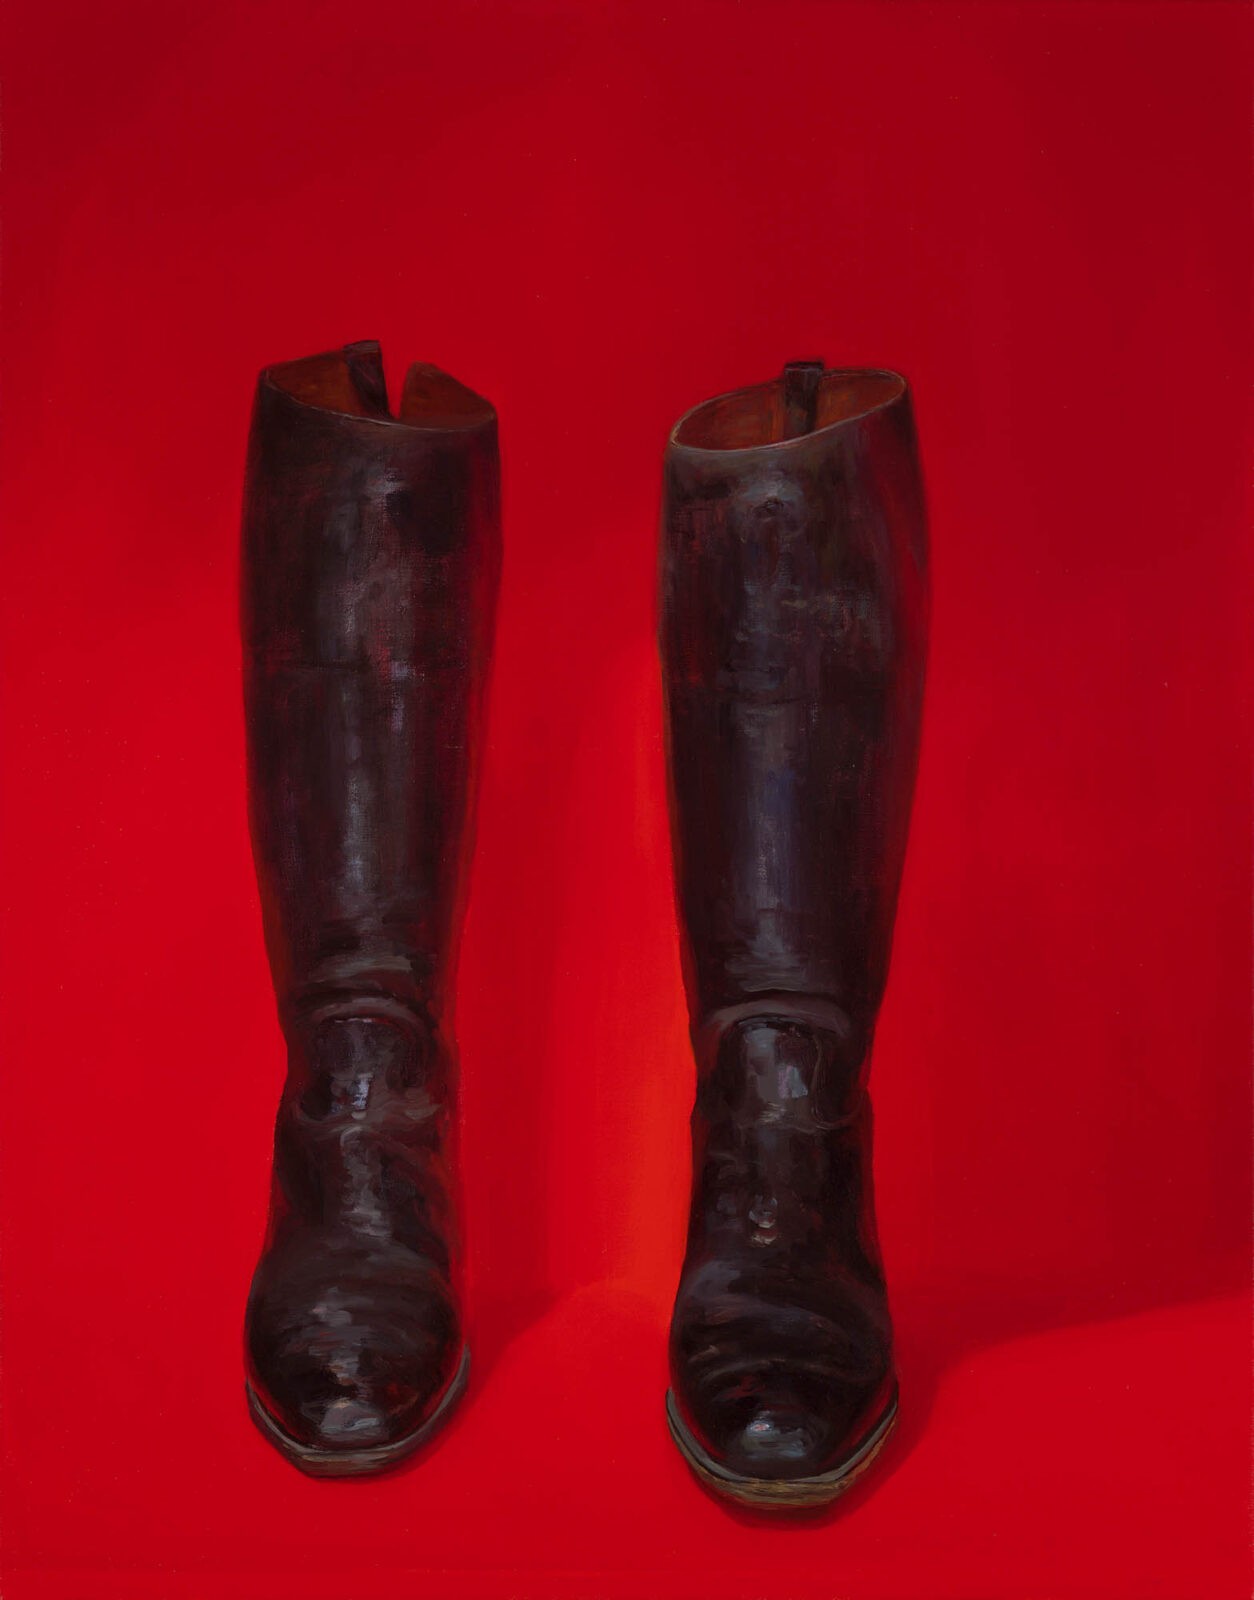 Liza Visagie - Black Boots. Oil on Linen 22 x 28 inches